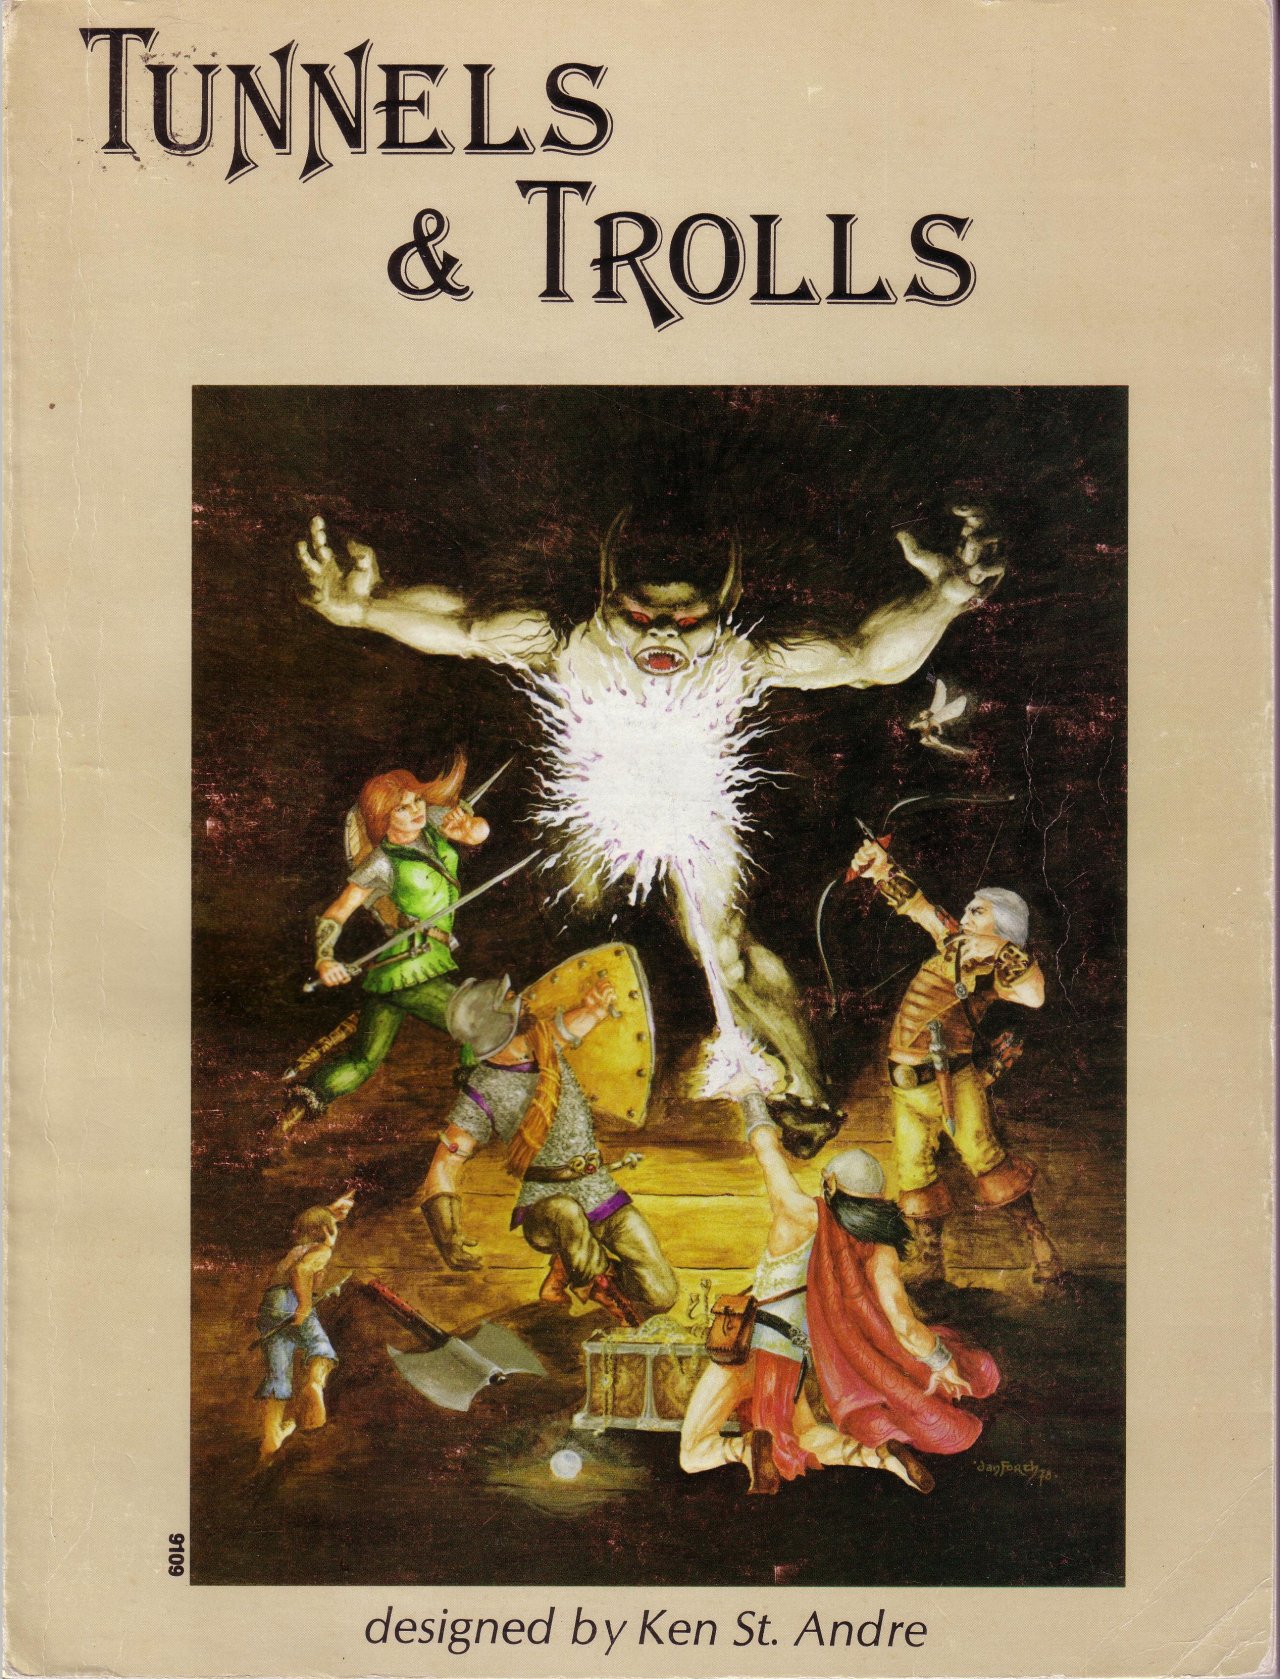 Tunnels and Trolls, l’alternativa vintage a Dungeons & Dragons